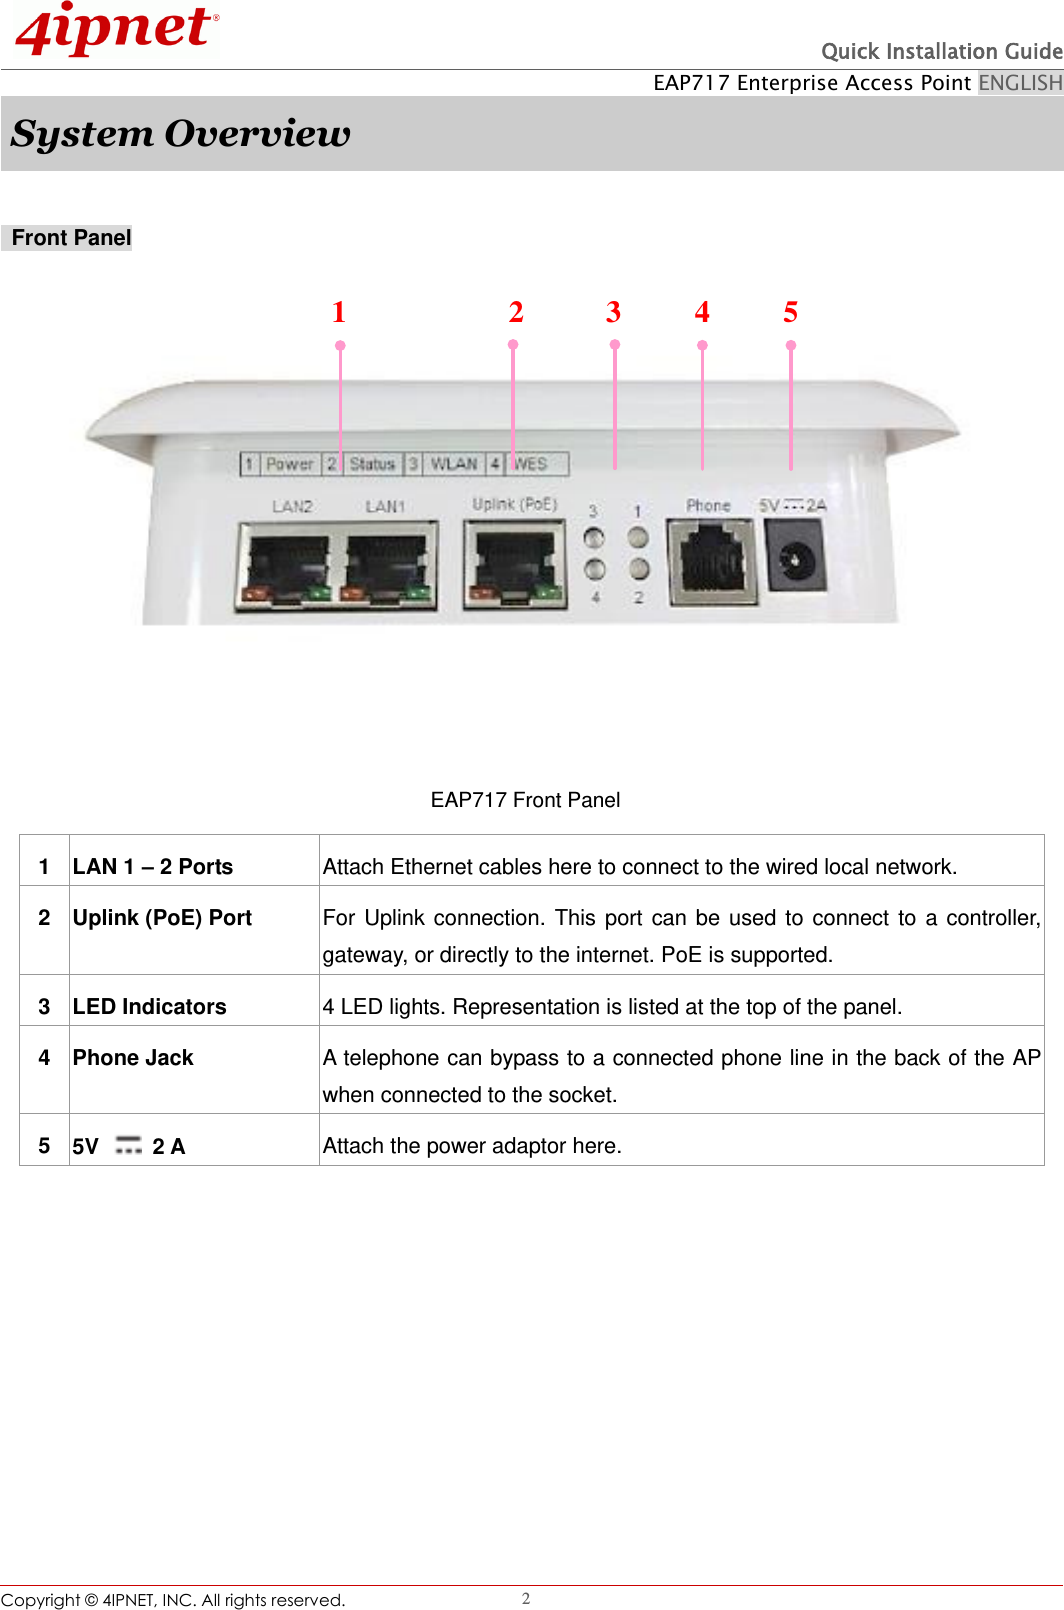  Quick Installation Guide EAP717 Enterprise Access Point ENGLISH Copyright ©  4IPNET, INC. All rights reserved.                                                              2 System Overview   Front Panel 1 2 3 4 5 EAP717 Front Panel        1 LAN 1 – 2 Ports Attach Ethernet cables here to connect to the wired local network. 2 Uplink (PoE) Port For Uplink connection. This port can be used to connect to a controller, gateway, or directly to the internet. PoE is supported. 3 LED Indicators 4 LED lights. Representation is listed at the top of the panel.   4 Phone Jack A telephone can bypass to a connected phone line in the back of the AP when connected to the socket.   5 5V    2 A Attach the power adaptor here. 